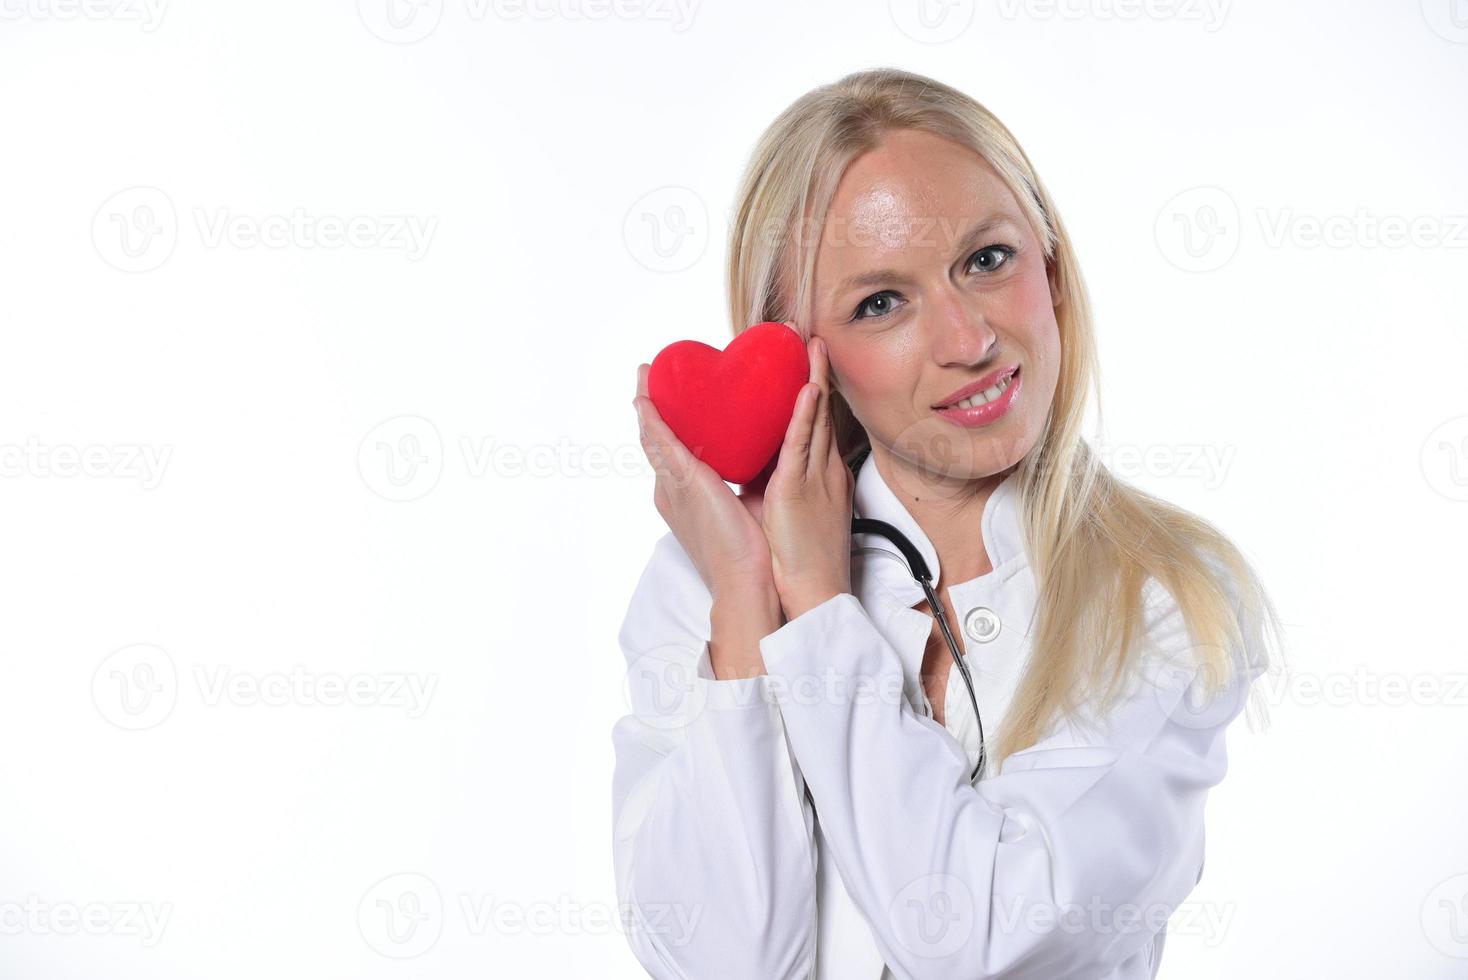 cardio heart surgeon hands holding red heart shape on white background photo